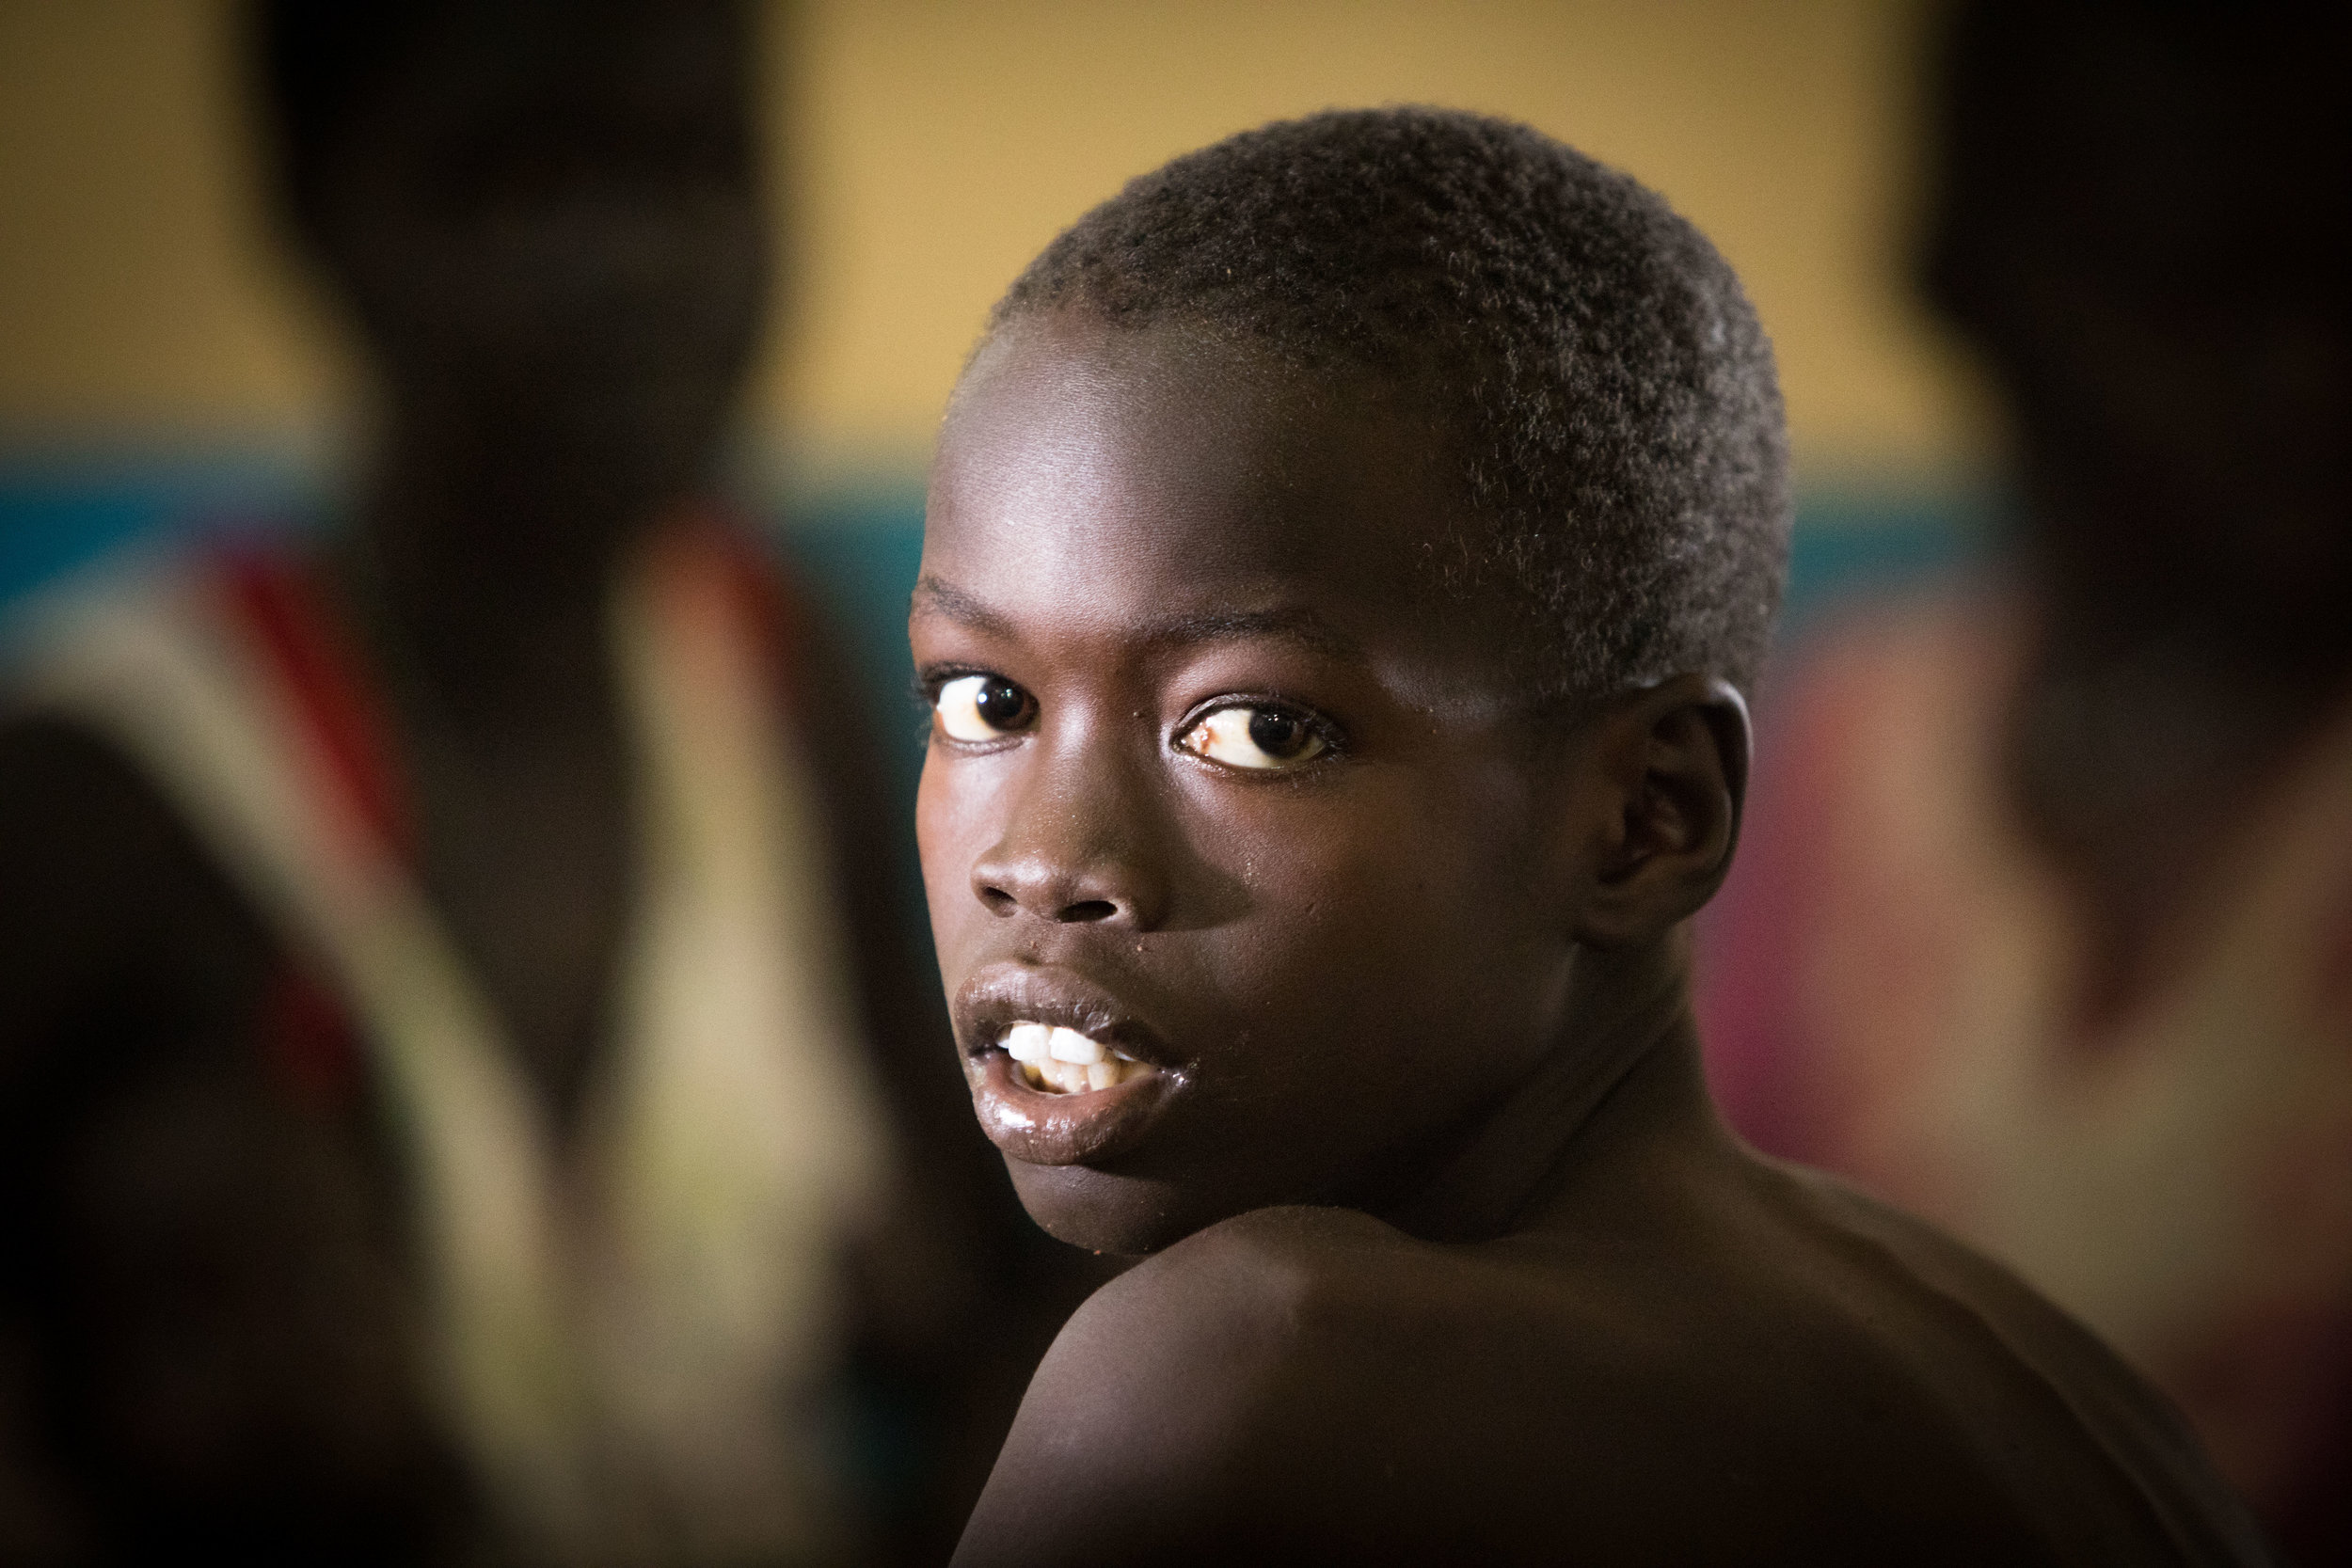 A young boy in the MSF run hospital in Aweil, South Sudan